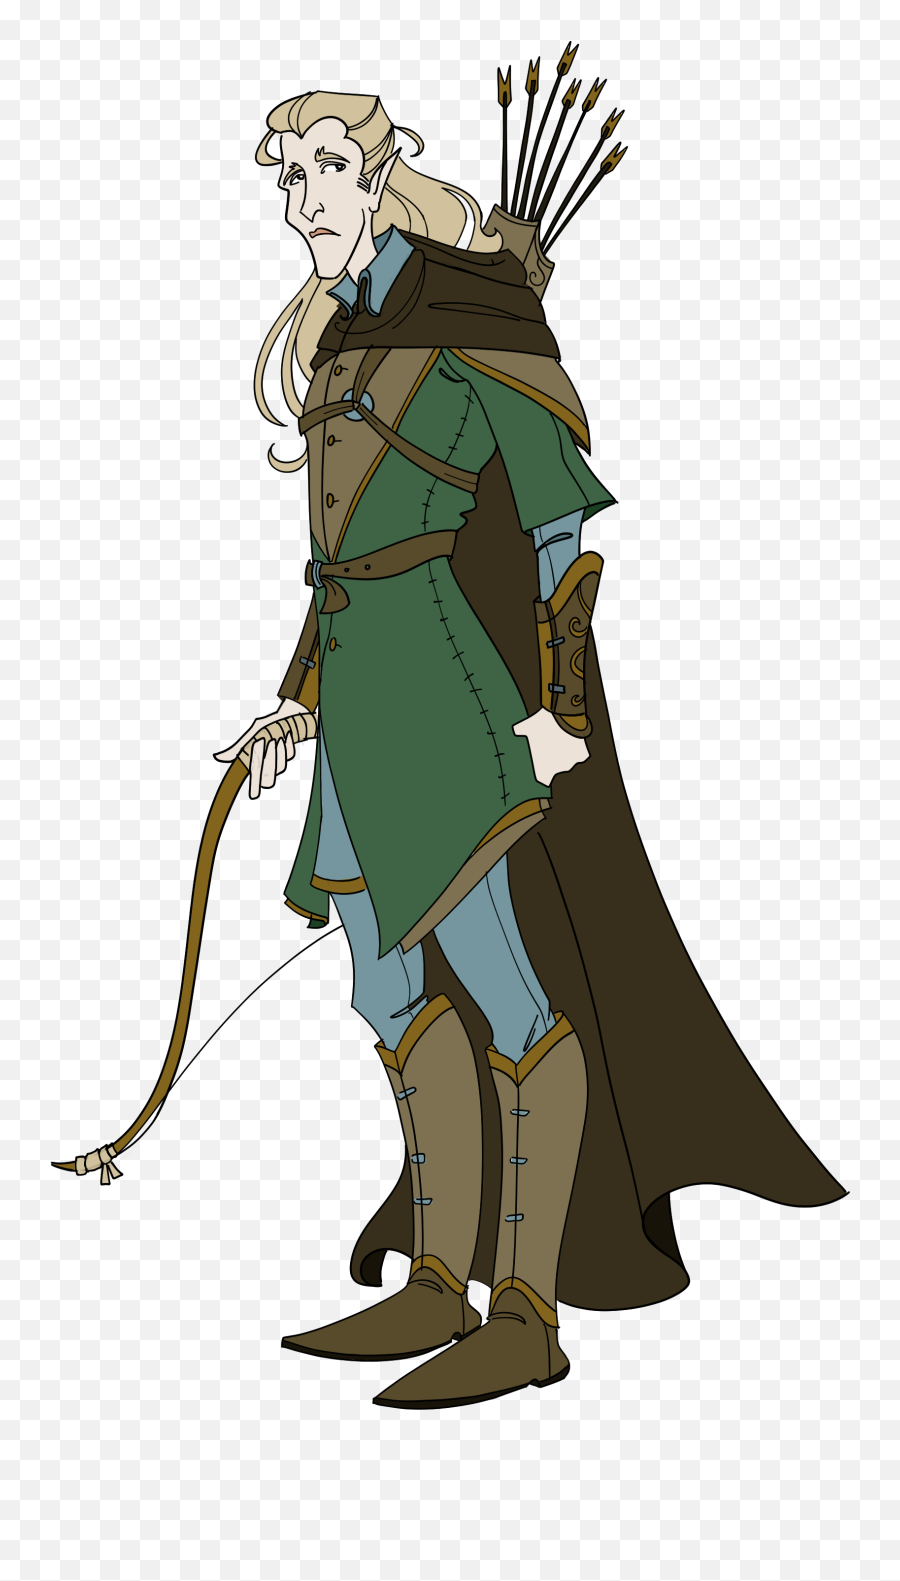 Animated Lord Of The Rings Concept Art U2013 Sierra Eley - Lord Of The Rings Animated Series Concept Art Png,Legolas Png